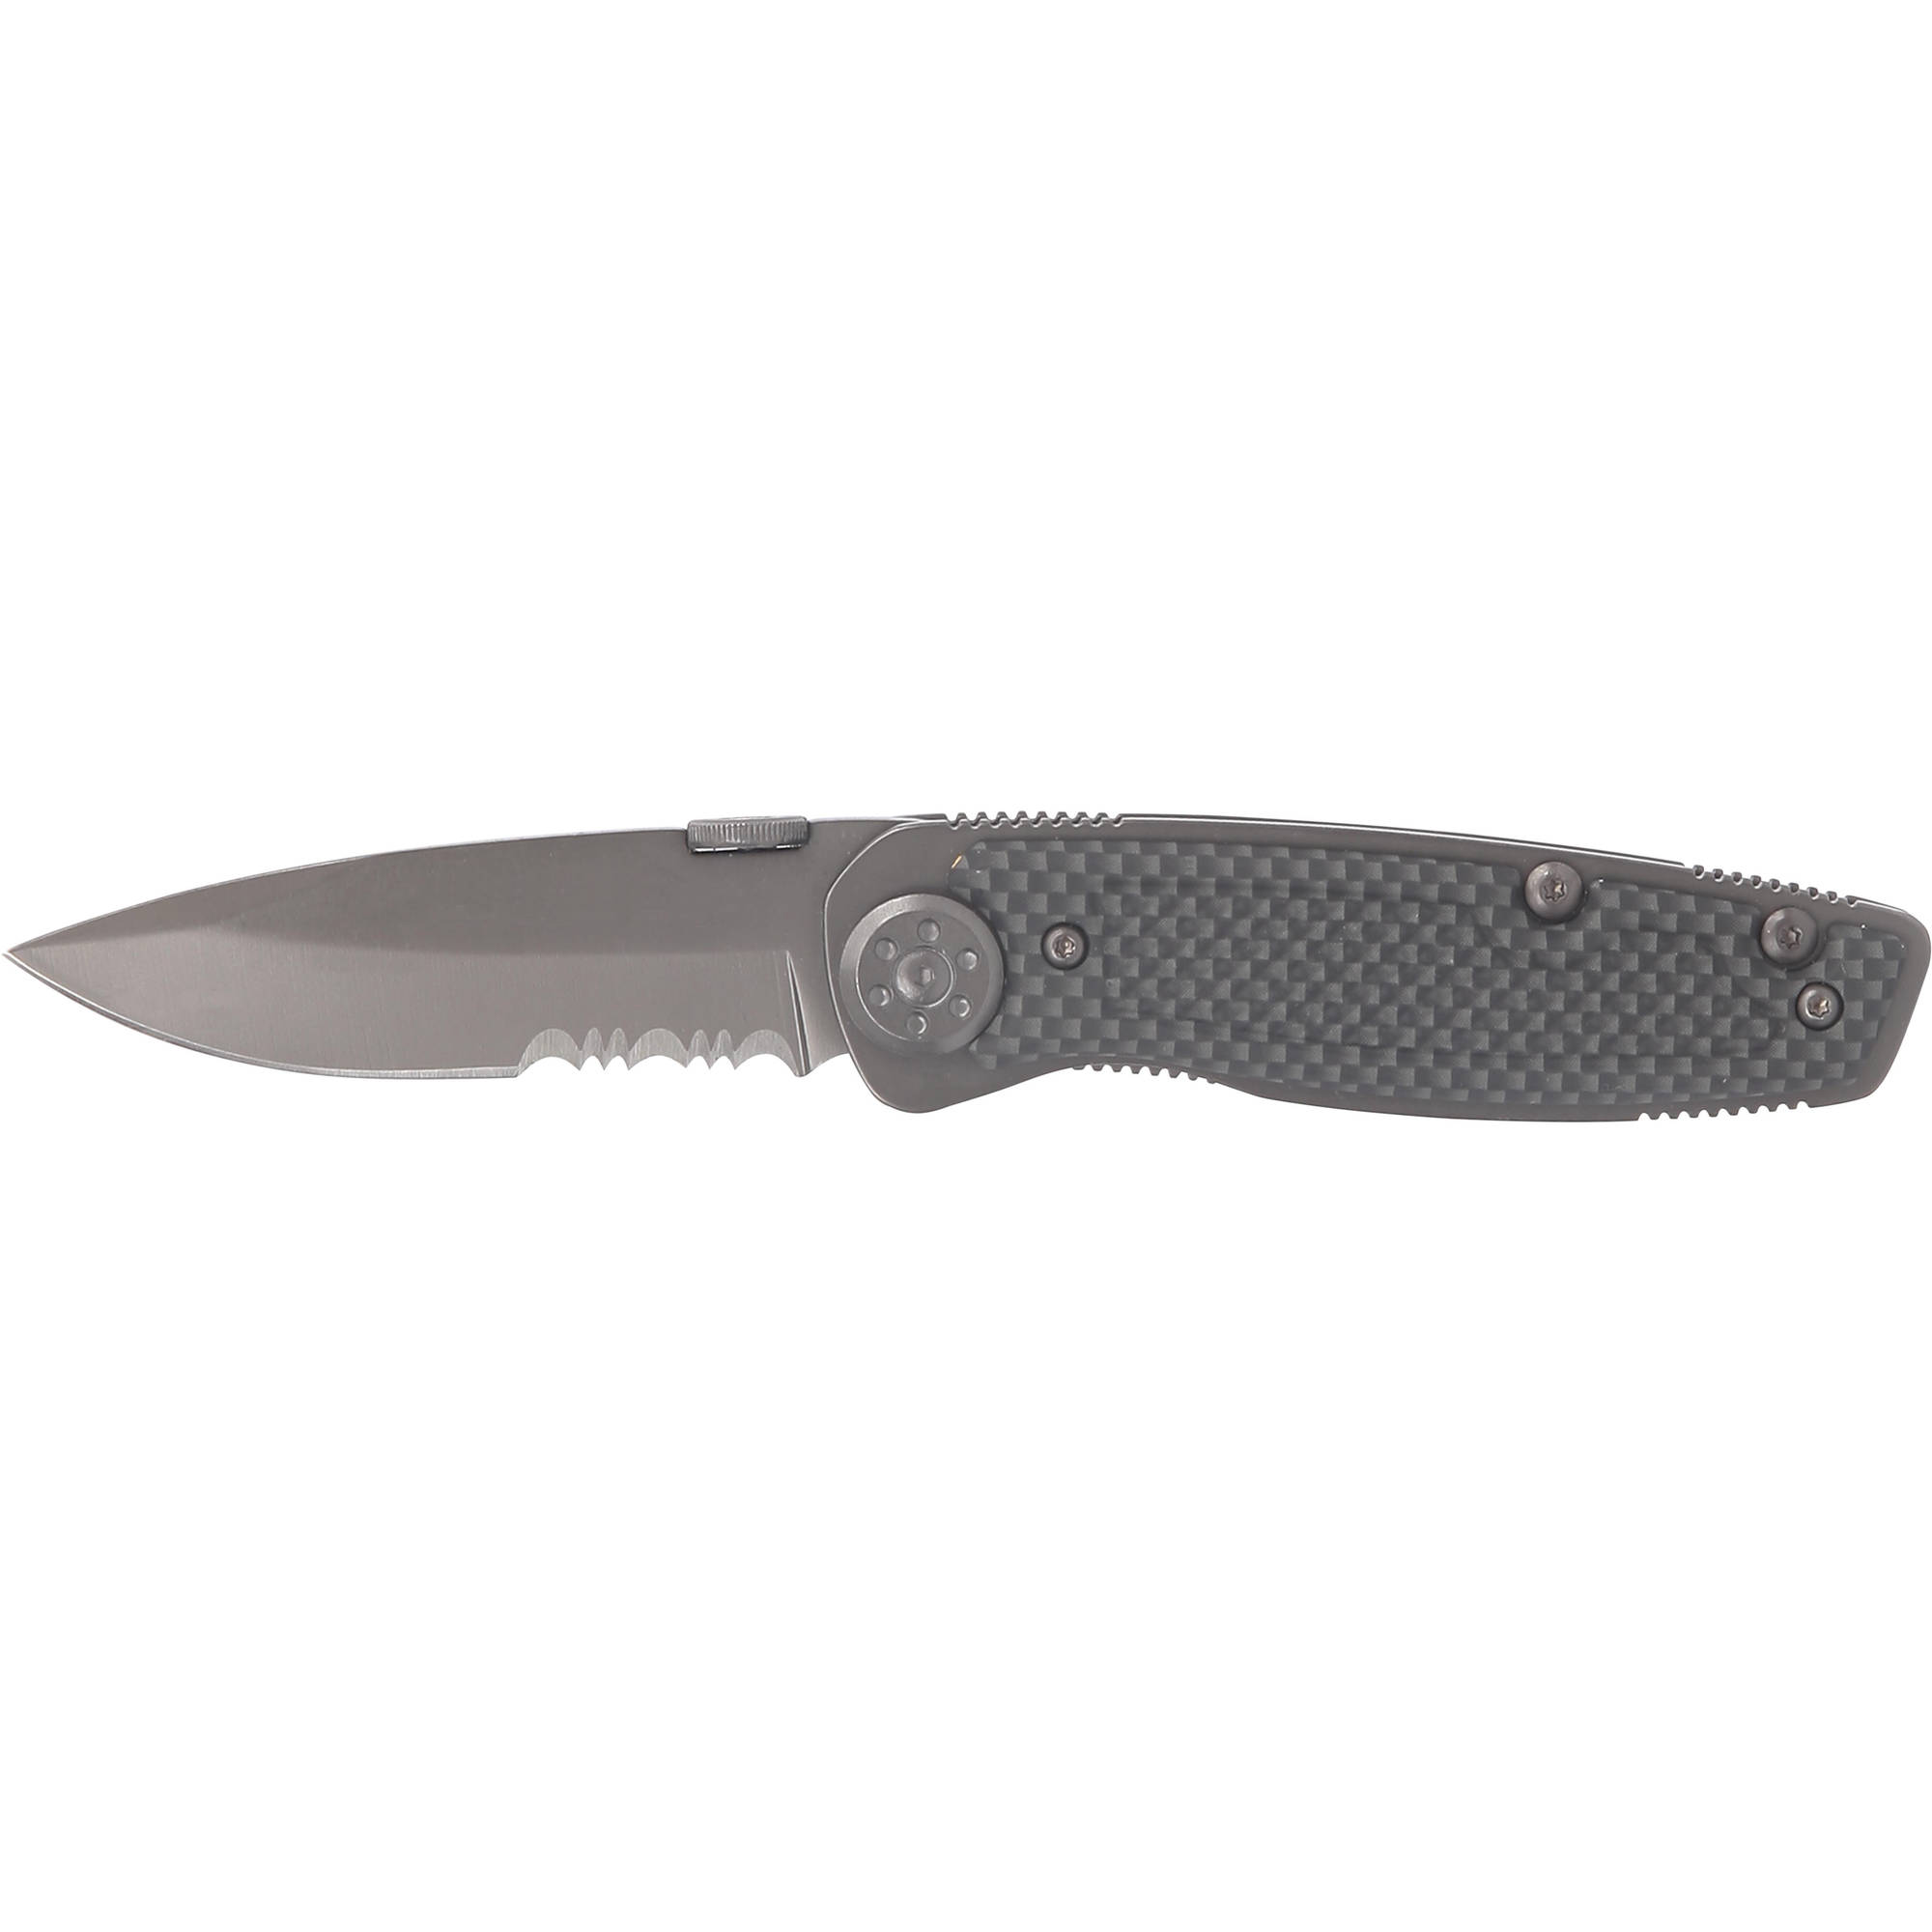 Ozark Trail Serrated Clip Knife with 3" Titanium Coated Blade, 3.75" Aluminum Handle and Pocket Clip - image 1 of 3